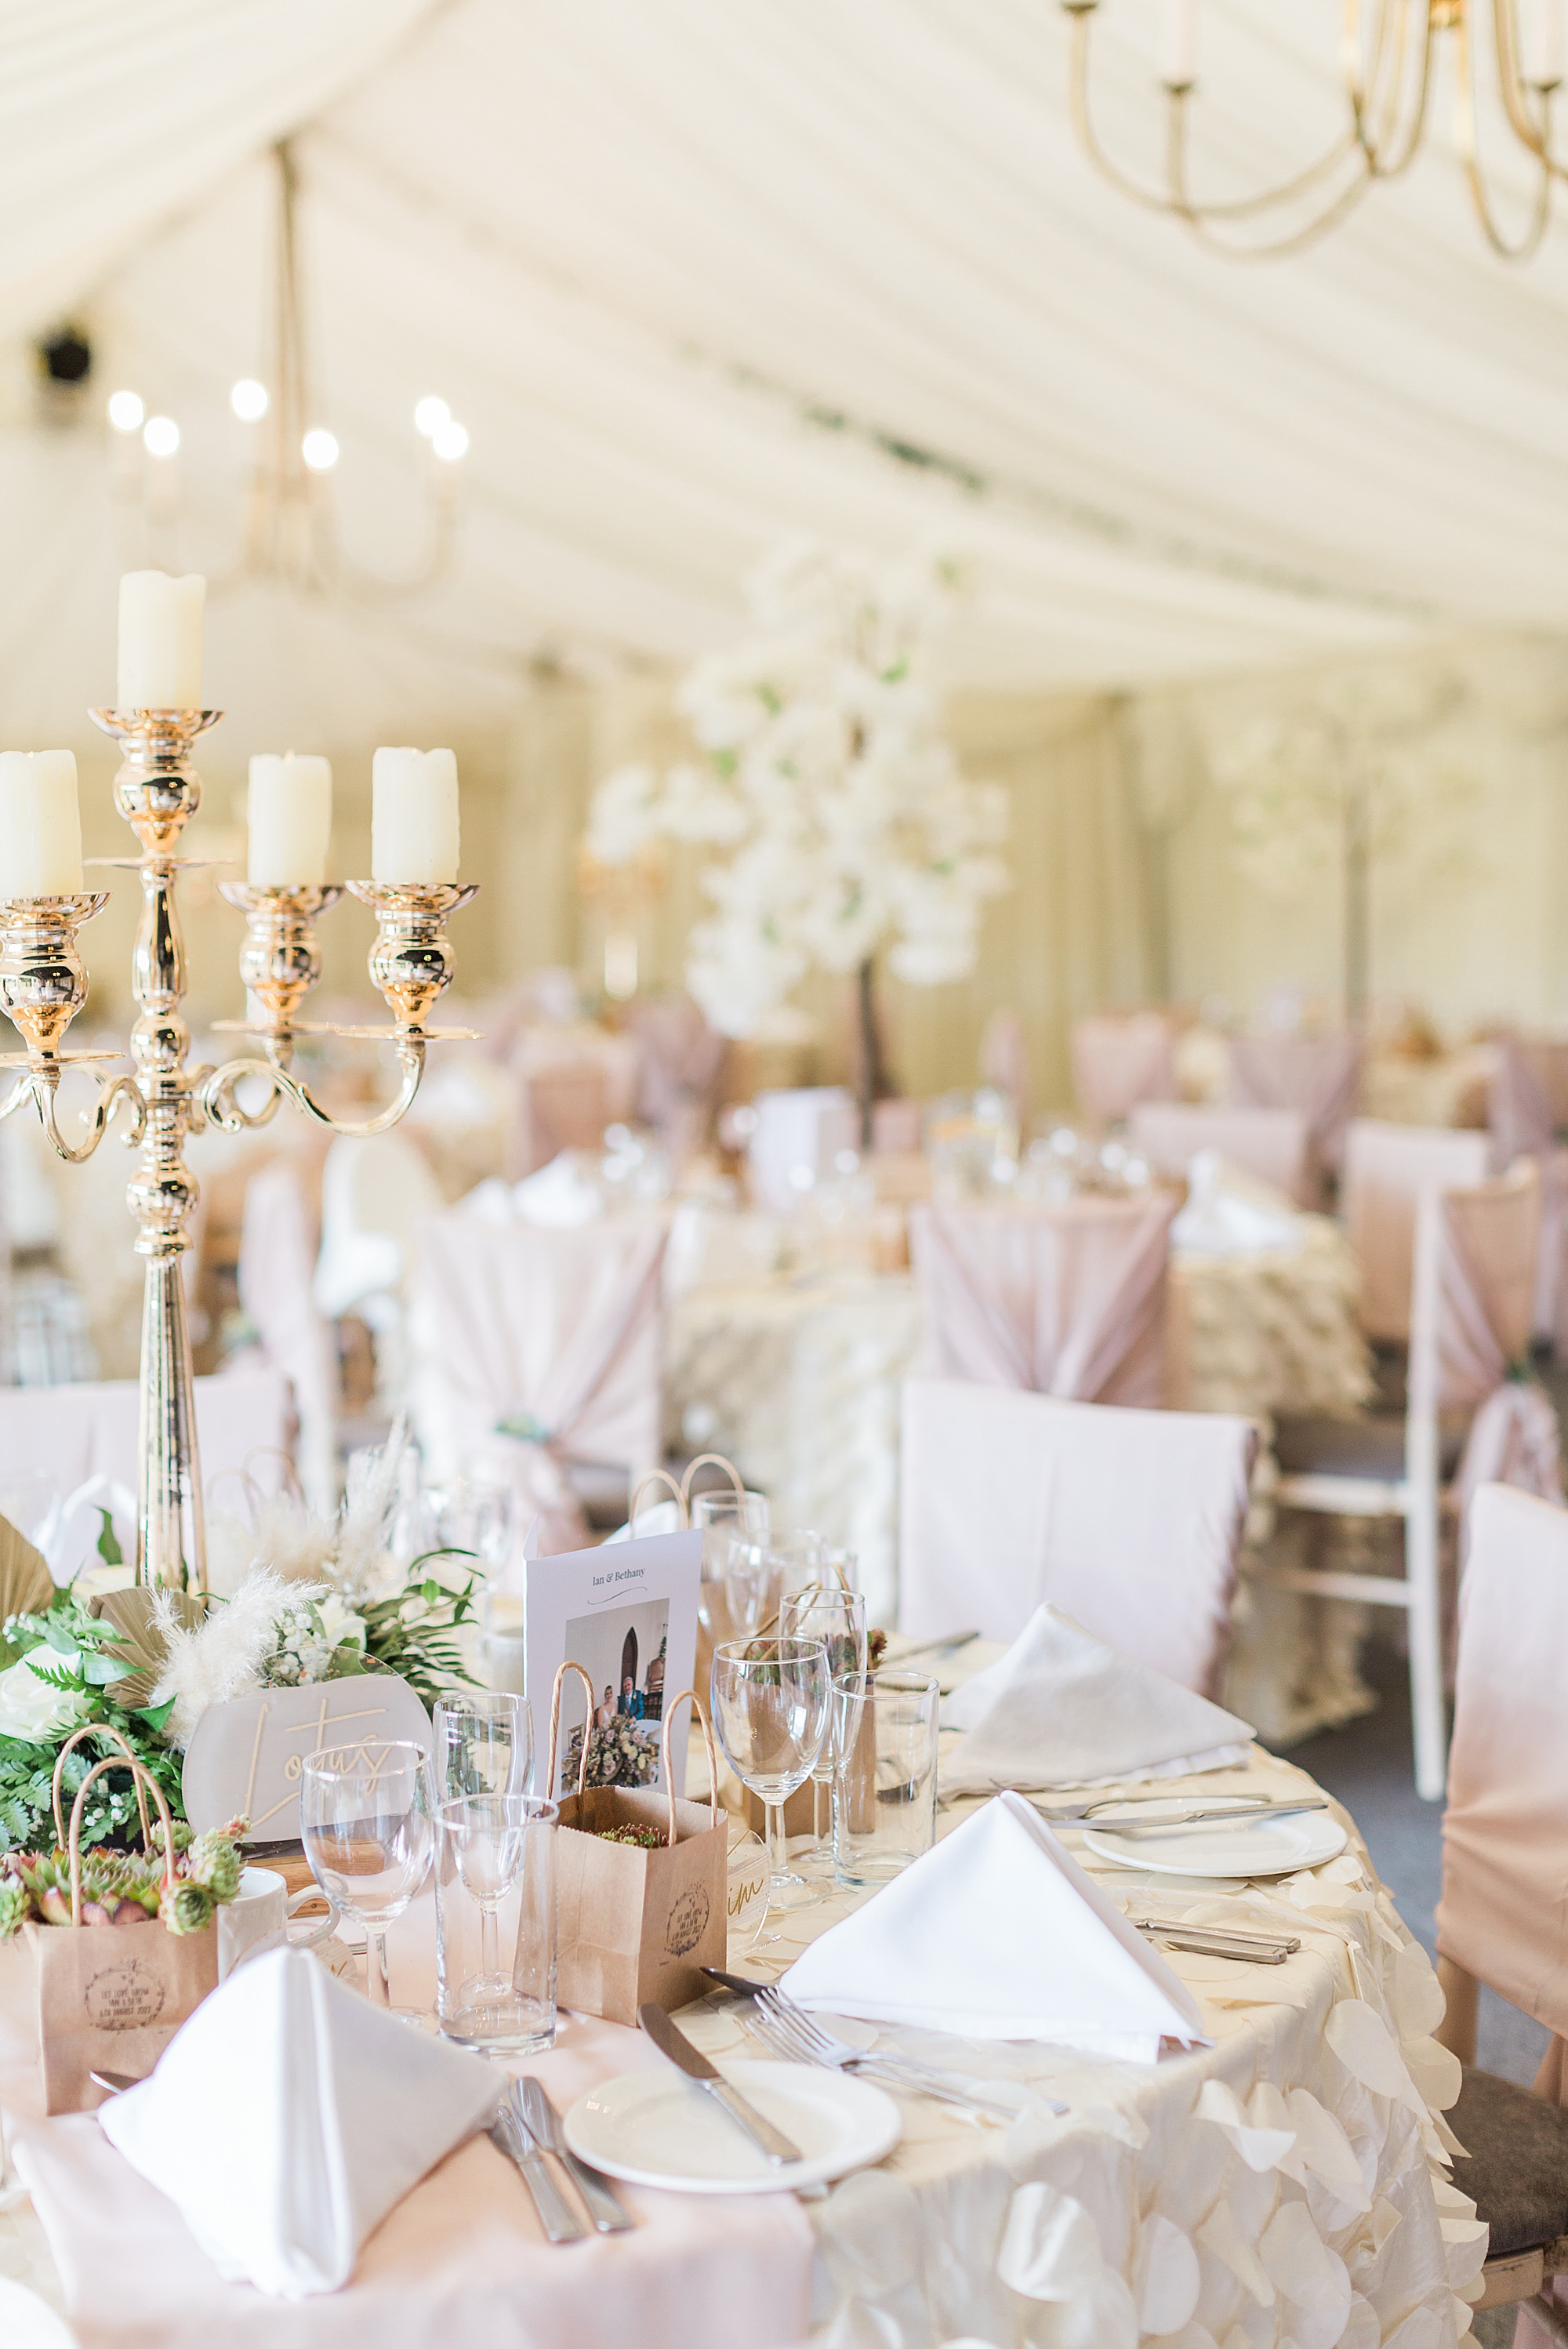 photo of the marquee at grafton manor beautifully styled ready for a wedding reception with pastel shades of dusky pink and white, with gold candelabras and white blossom trees